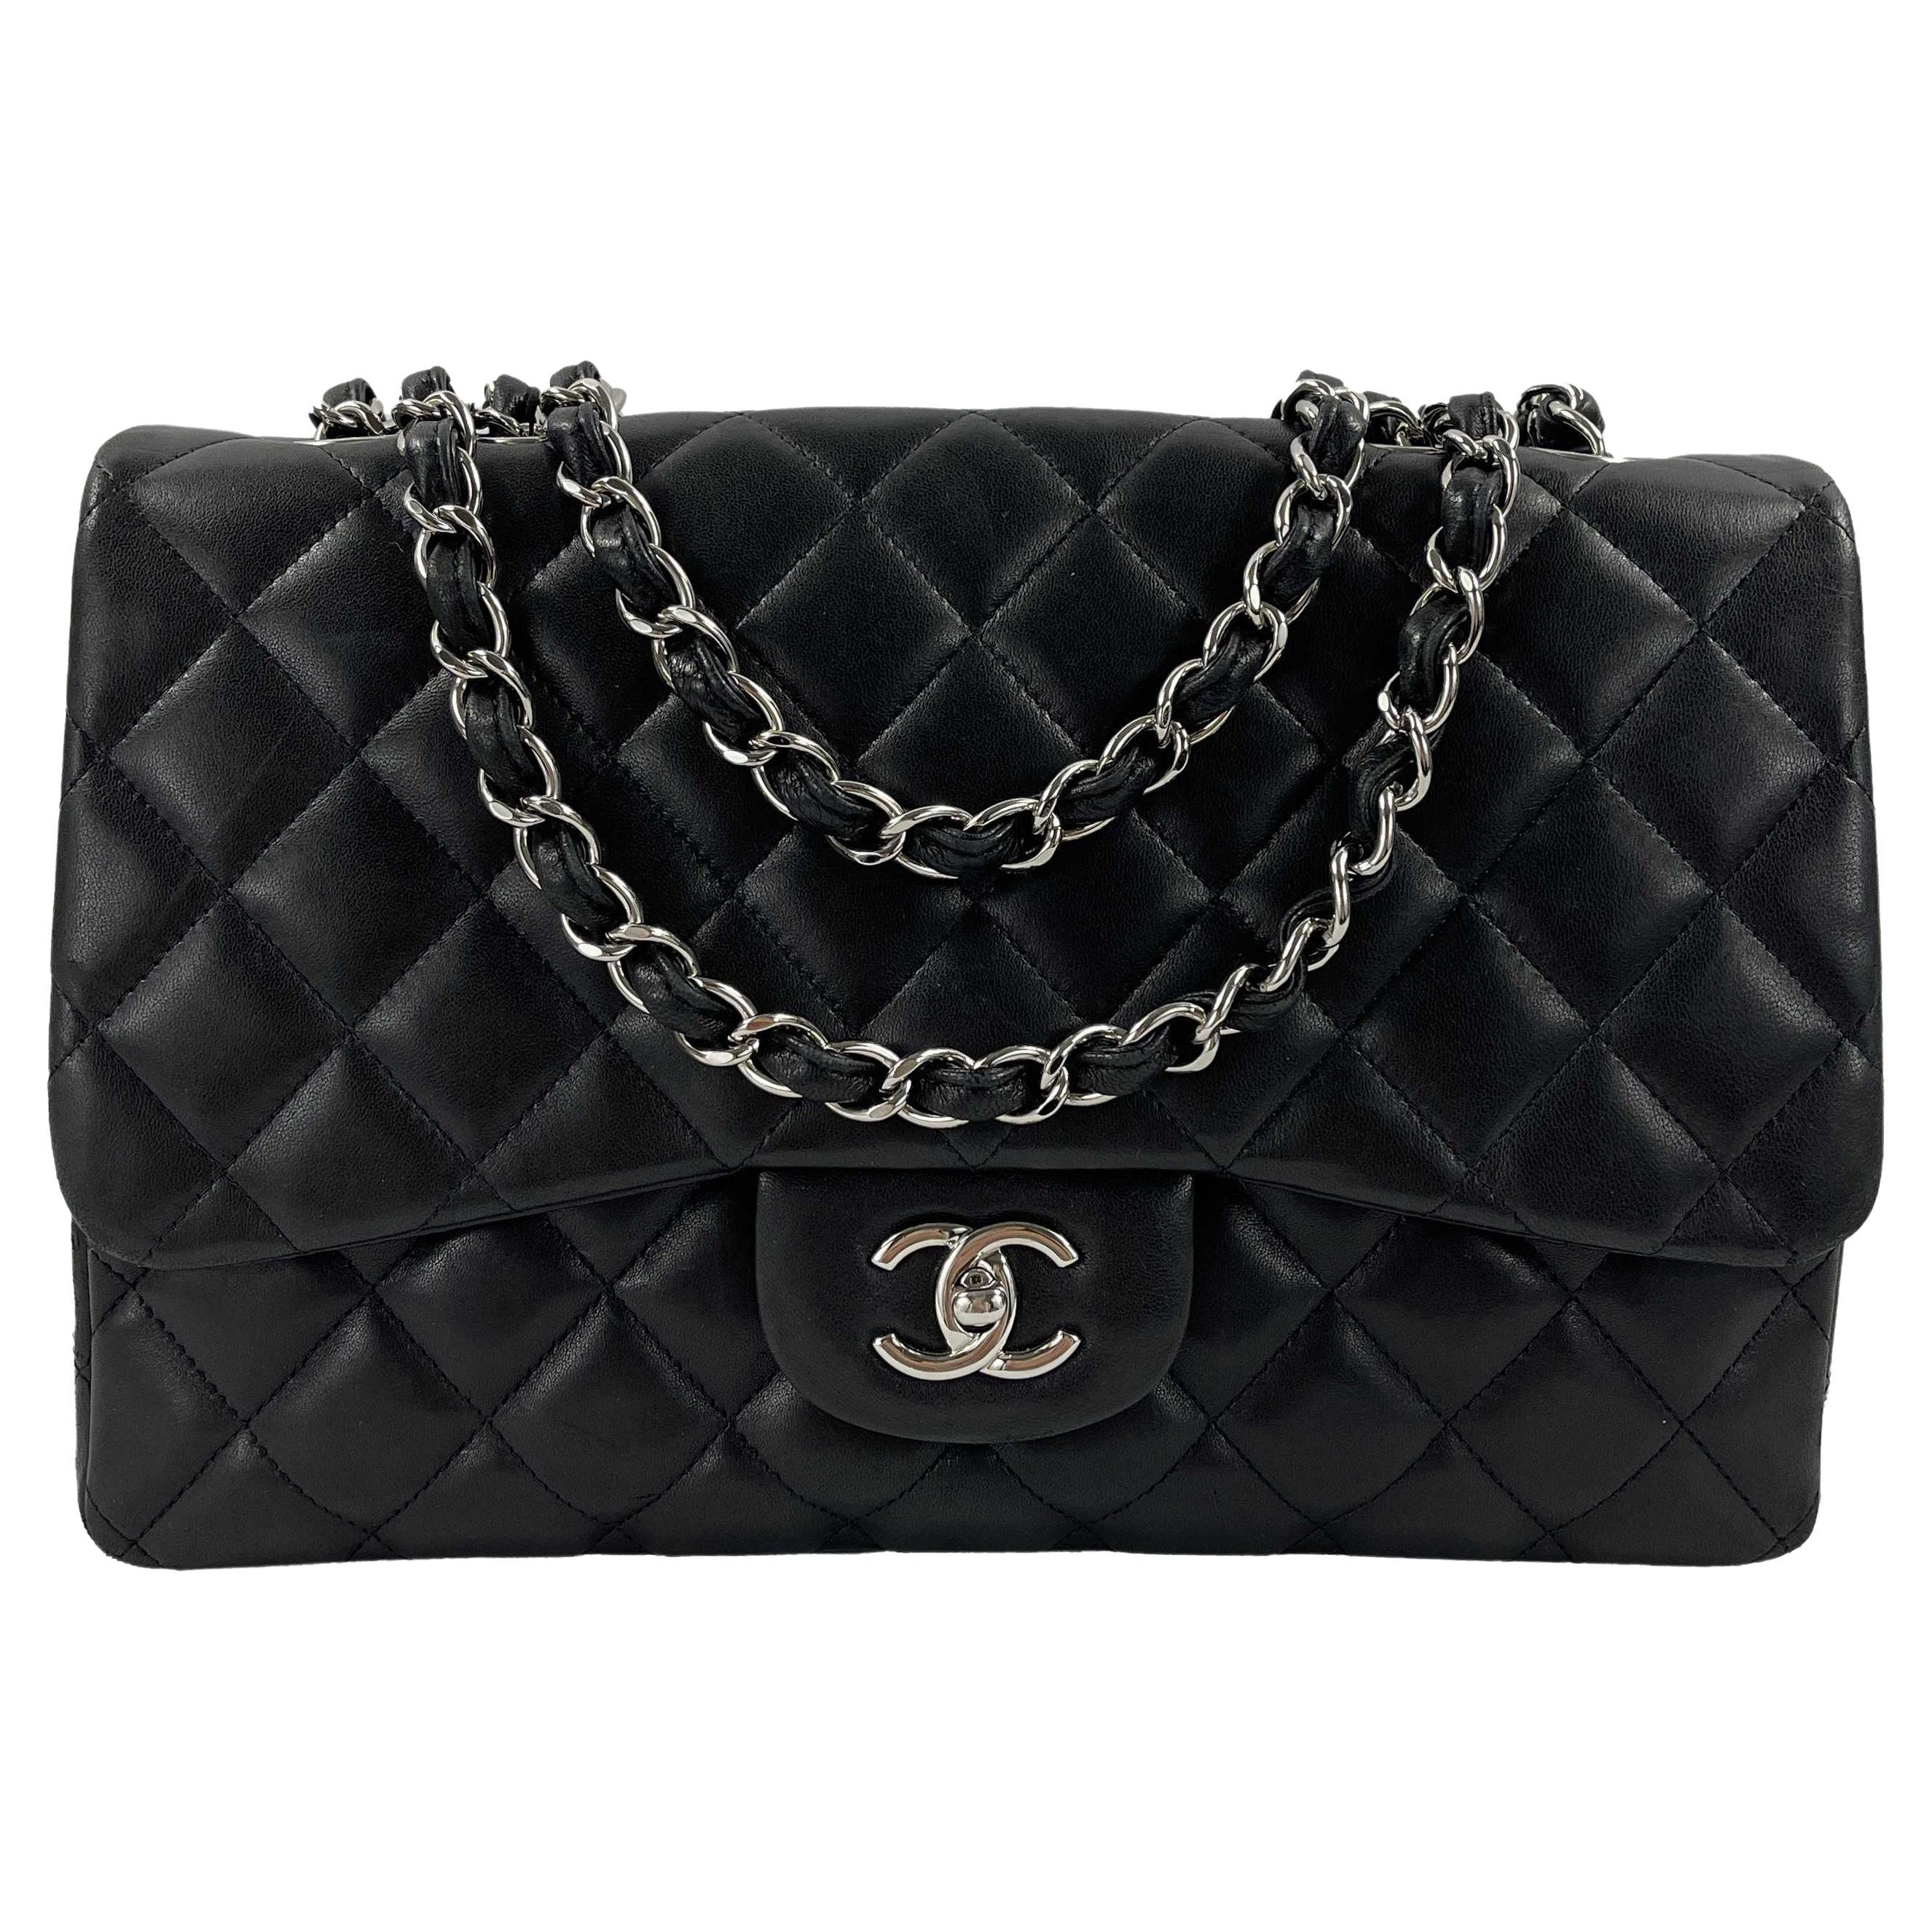 CHANEL - Classic Black / Silver Quilted Lambskin Flap CC Jumbo Shoulder Bag